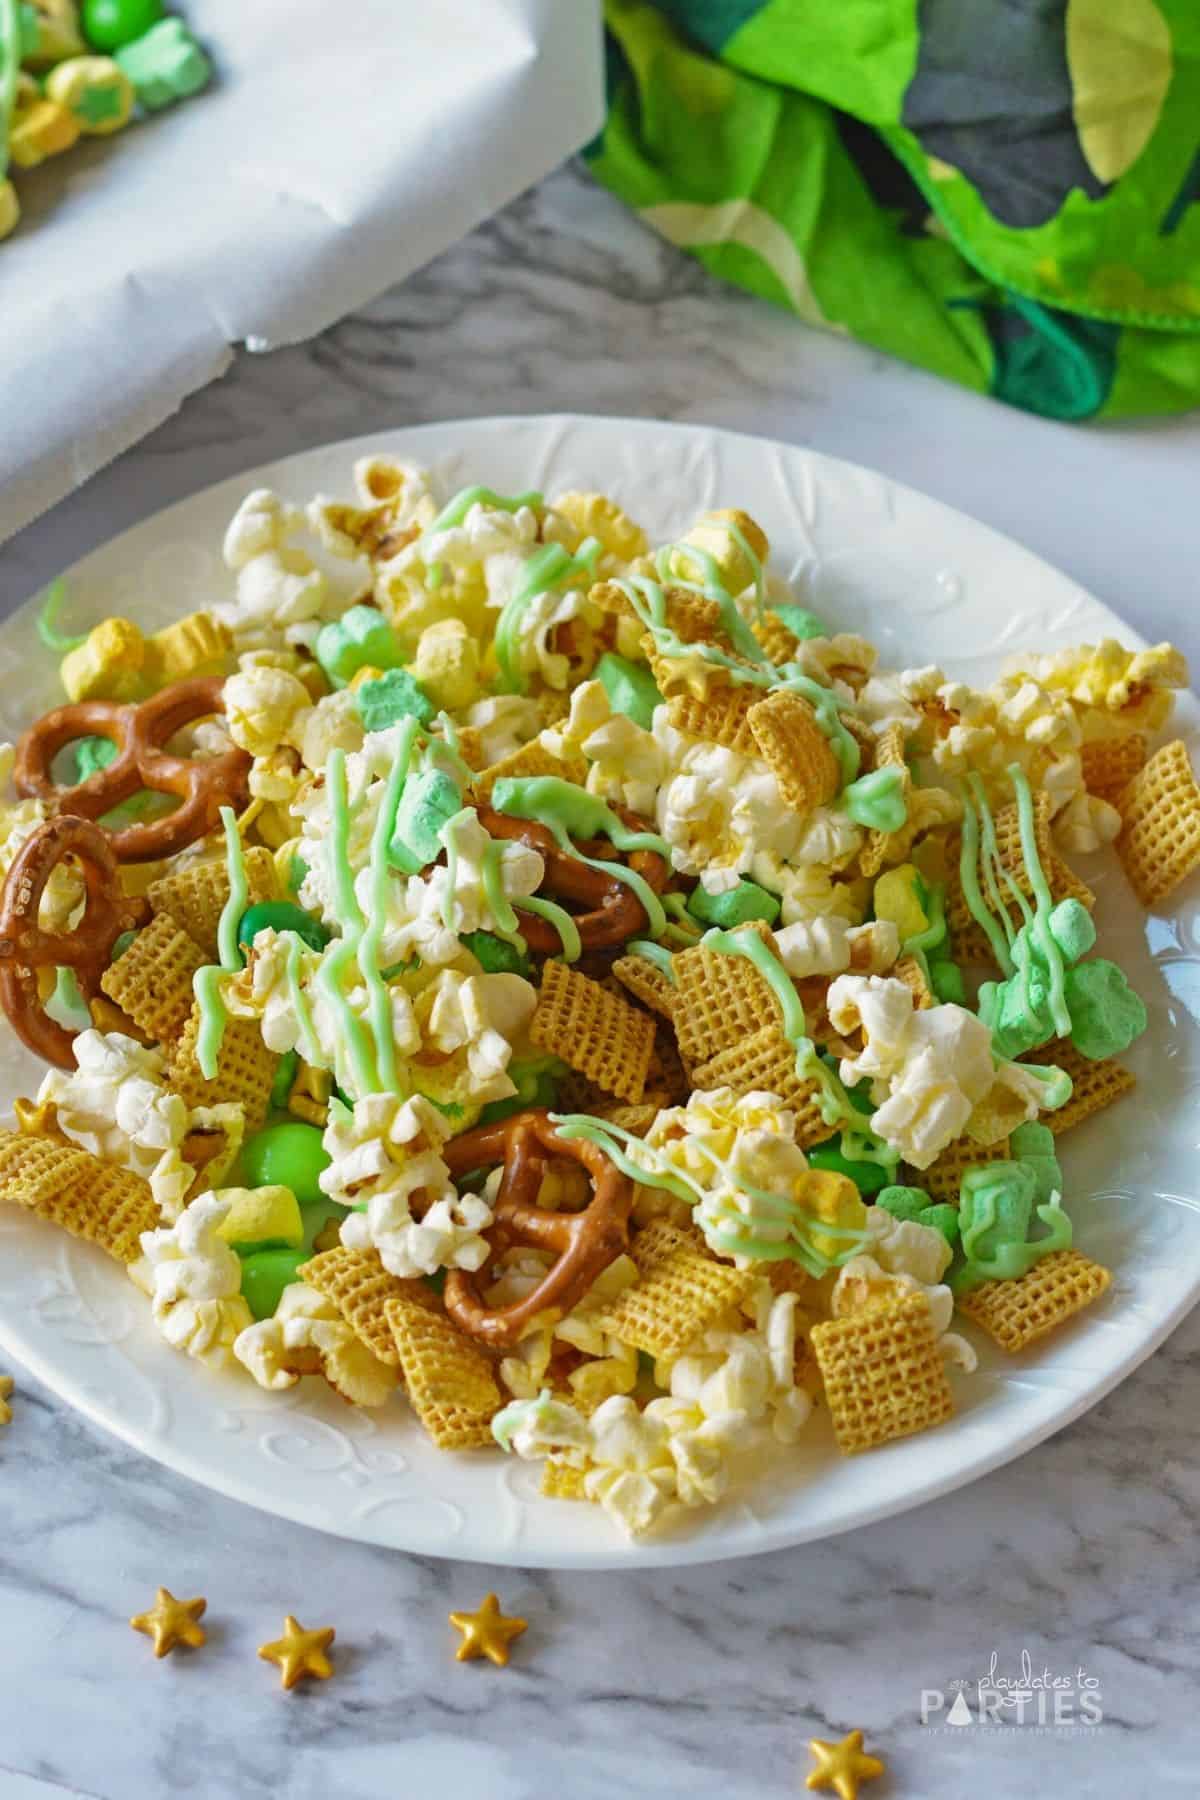 Leprechaun bait snack mix with large star sprinkles and light green chocolate.